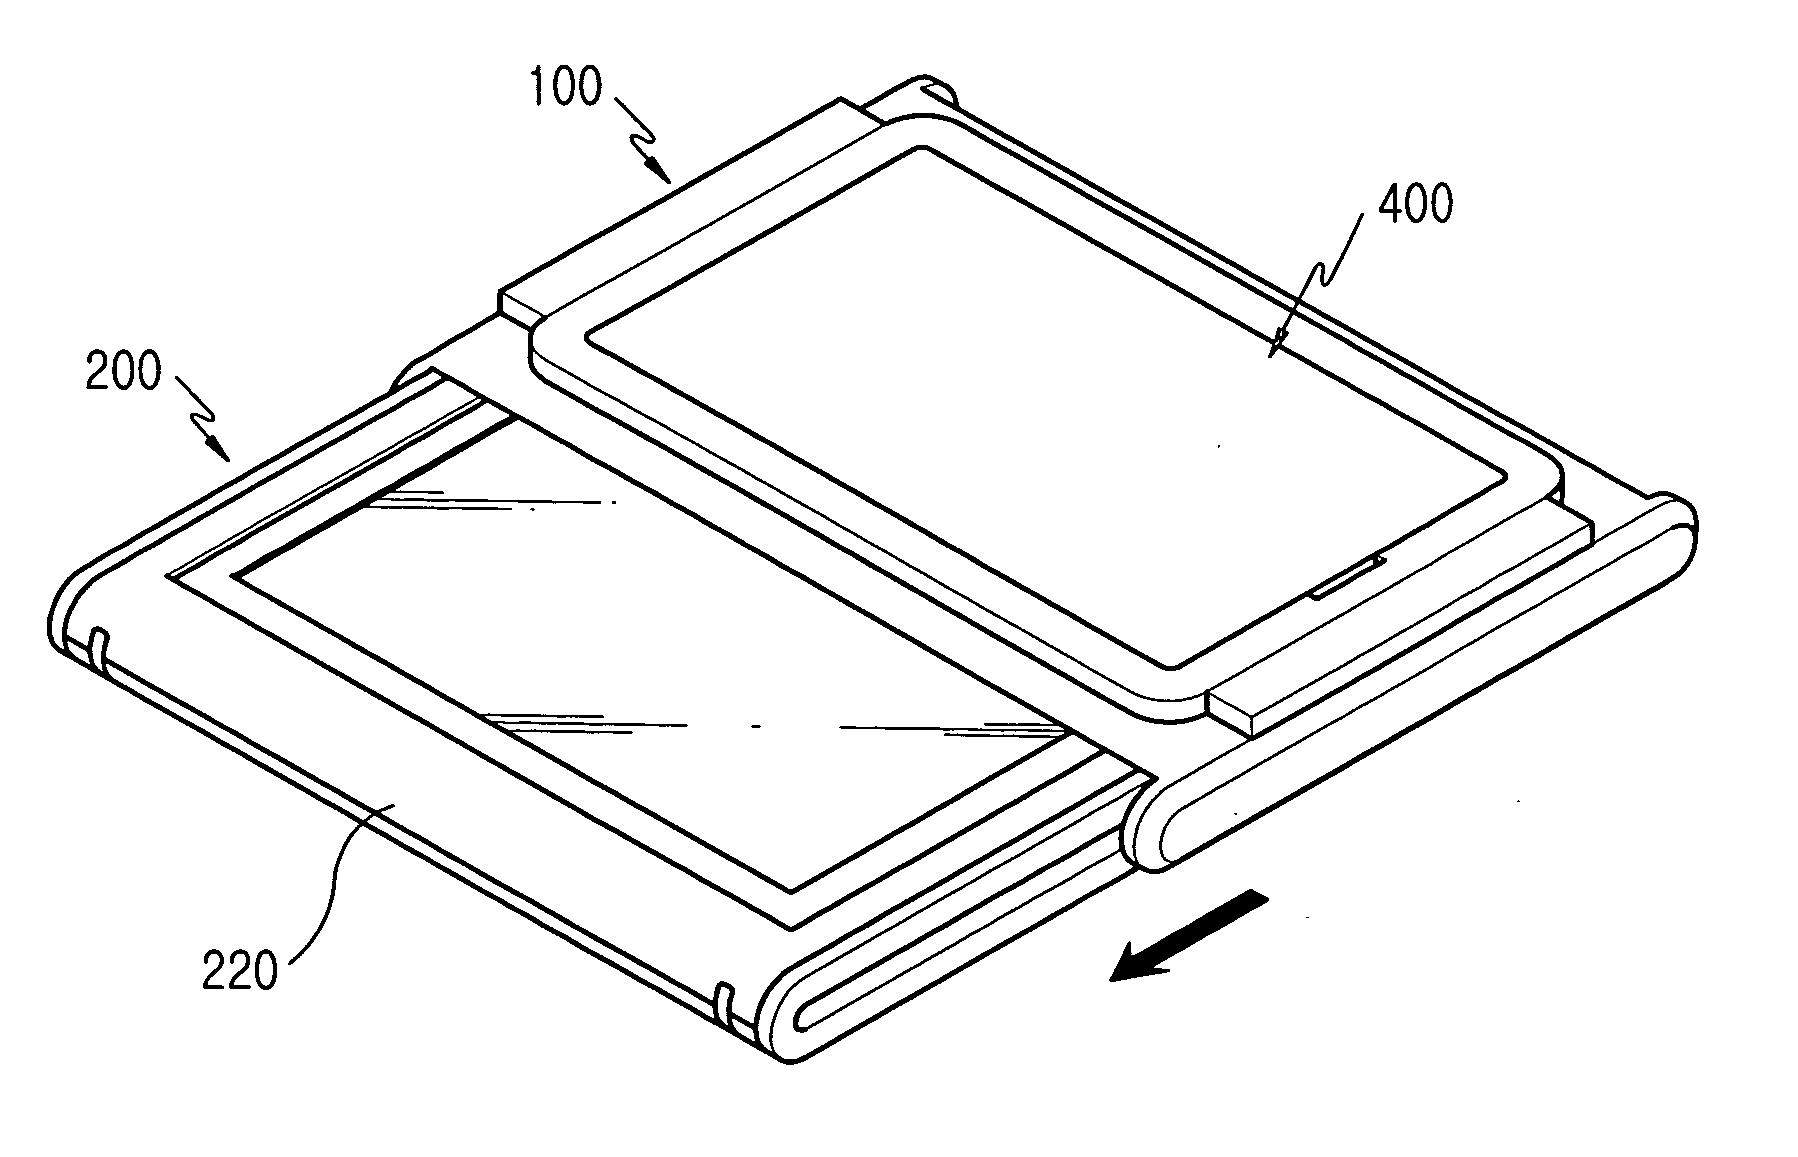 Portable communication terminal for displaying information